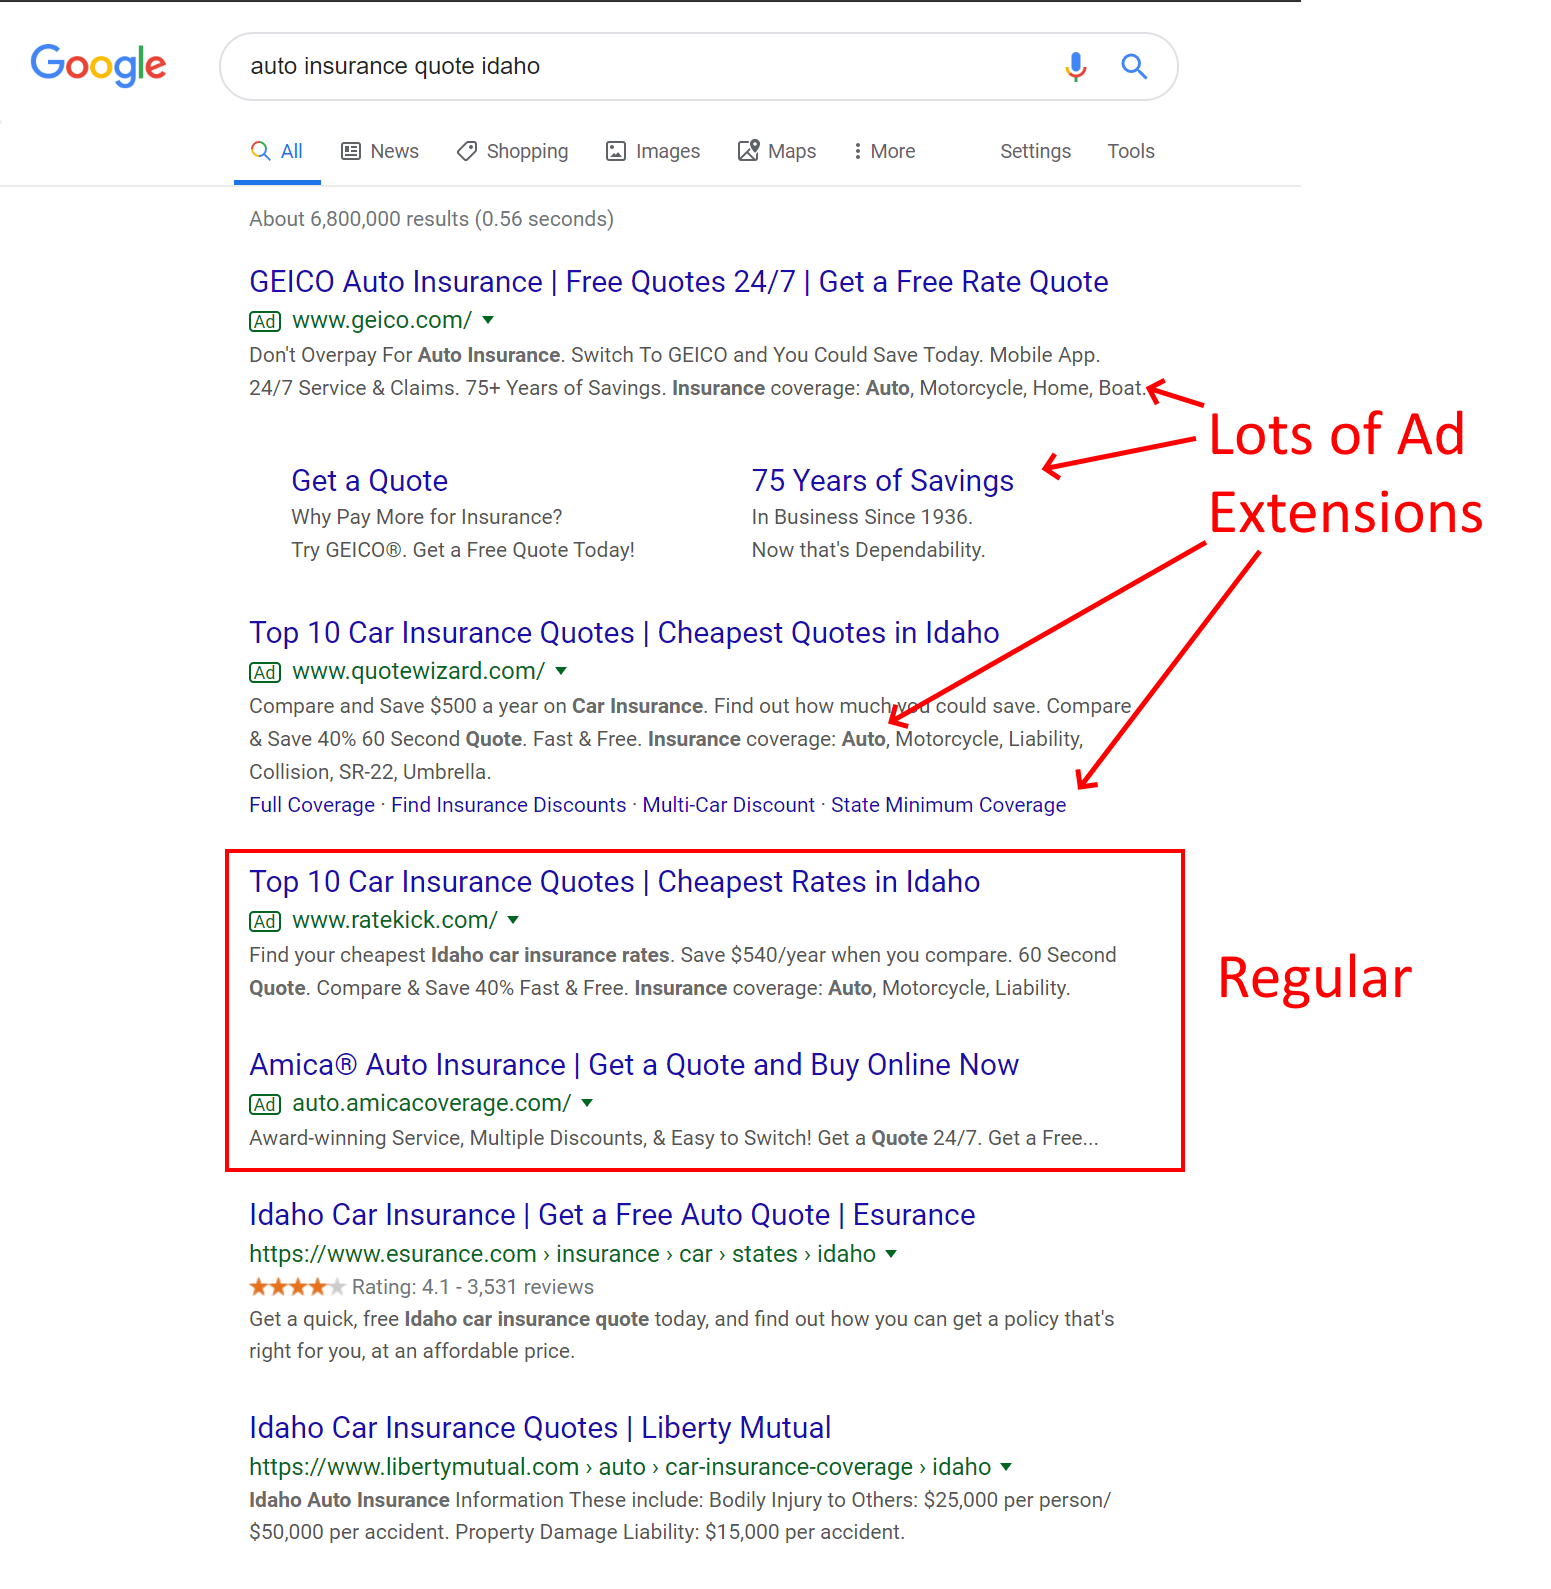 “Regular” search ads include the basics: headlines, description, and a URL. Many ads, however, also include extensions.